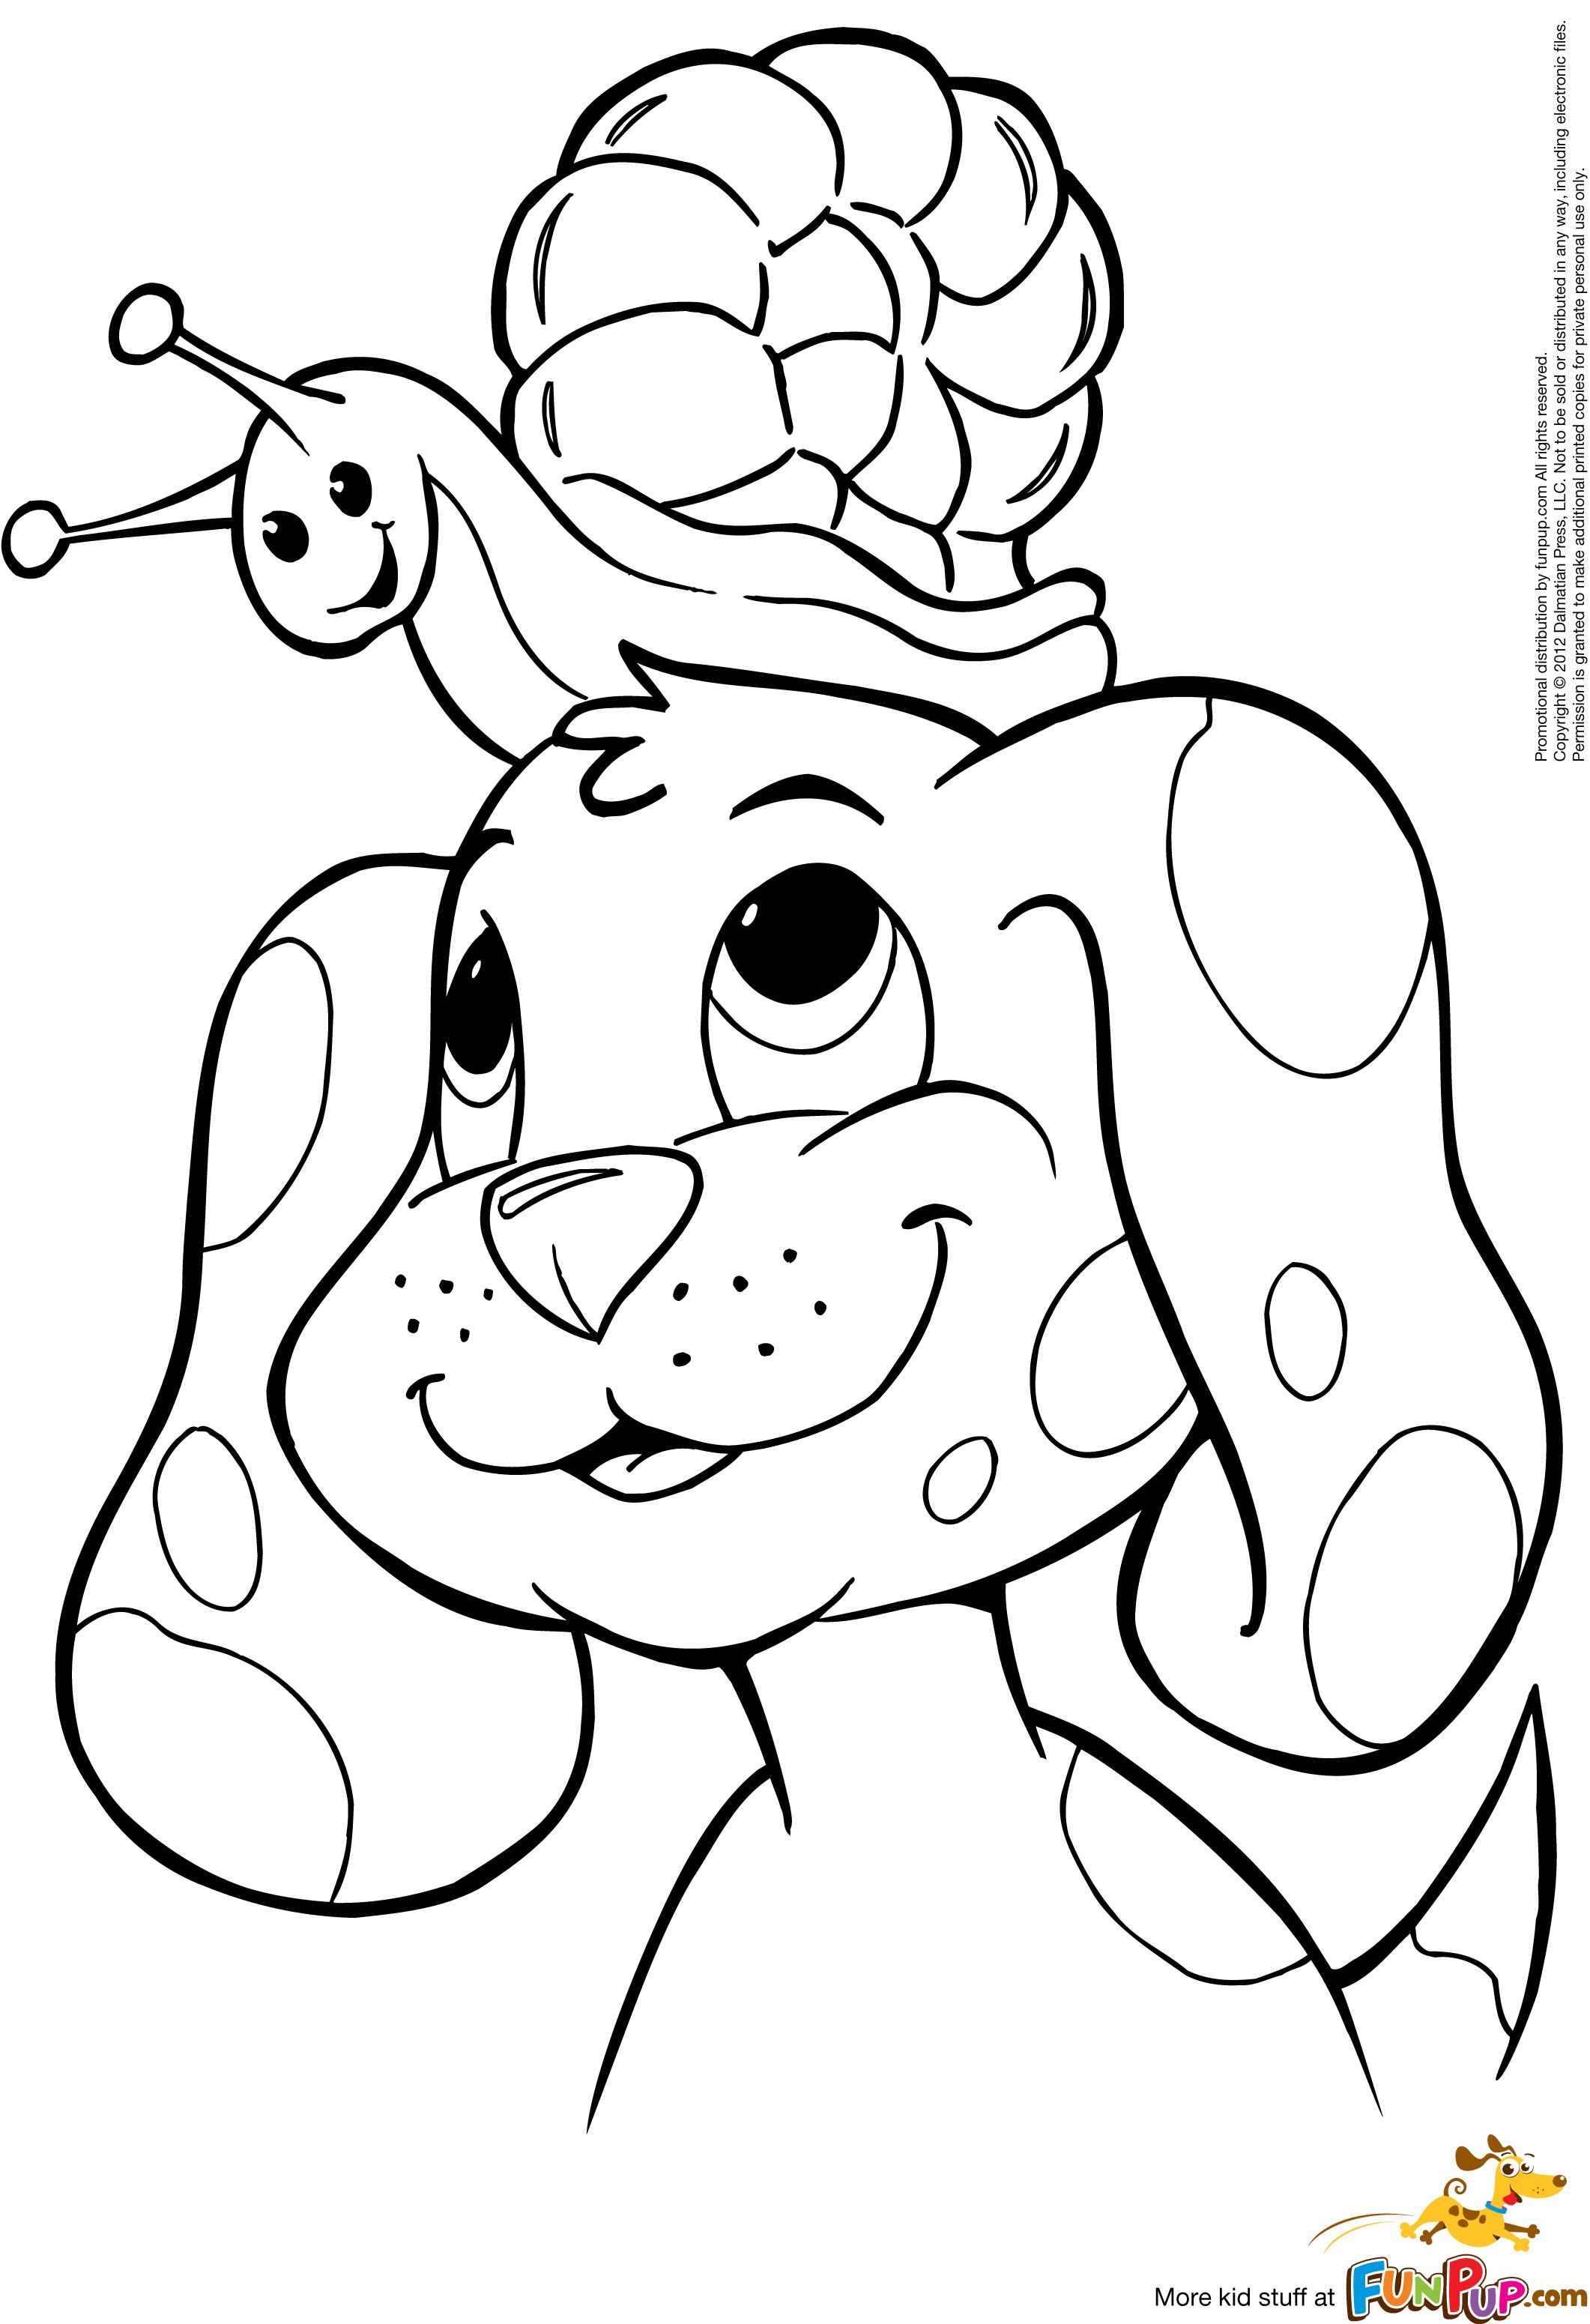 Halloween Dog Coloring Pages at GetColorings.com | Free ...